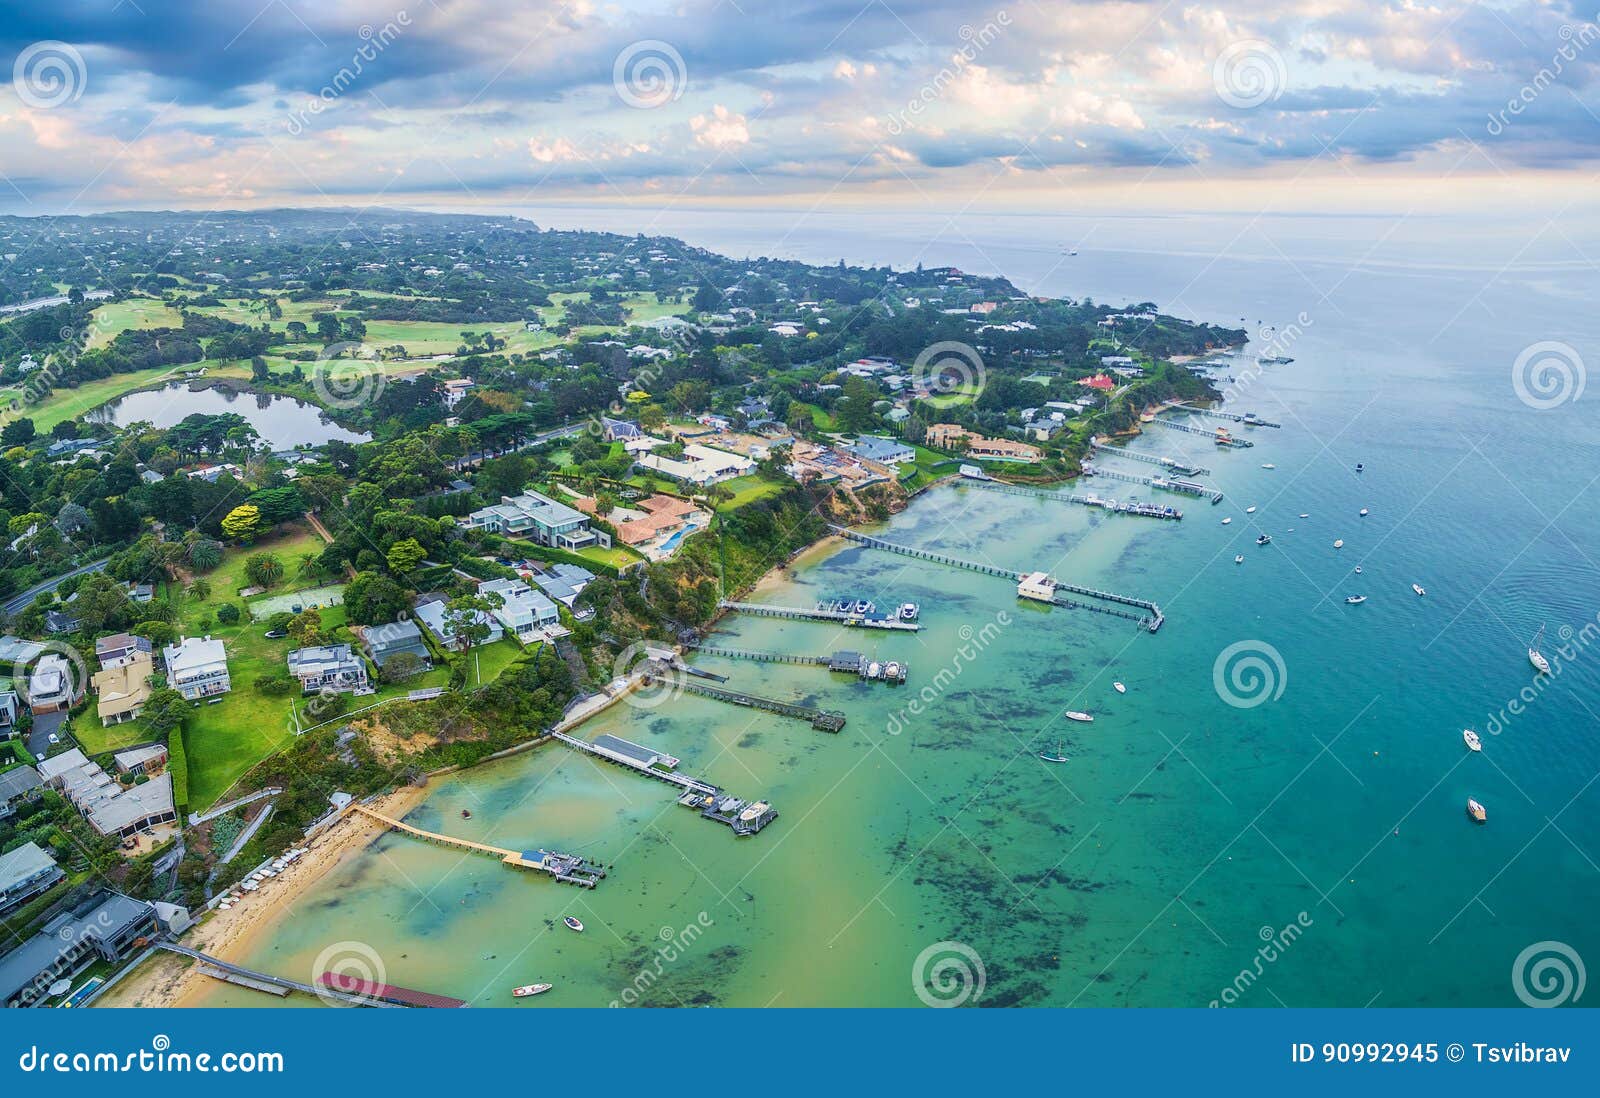 aerial landscape of sorrento suburb coastline with private piers